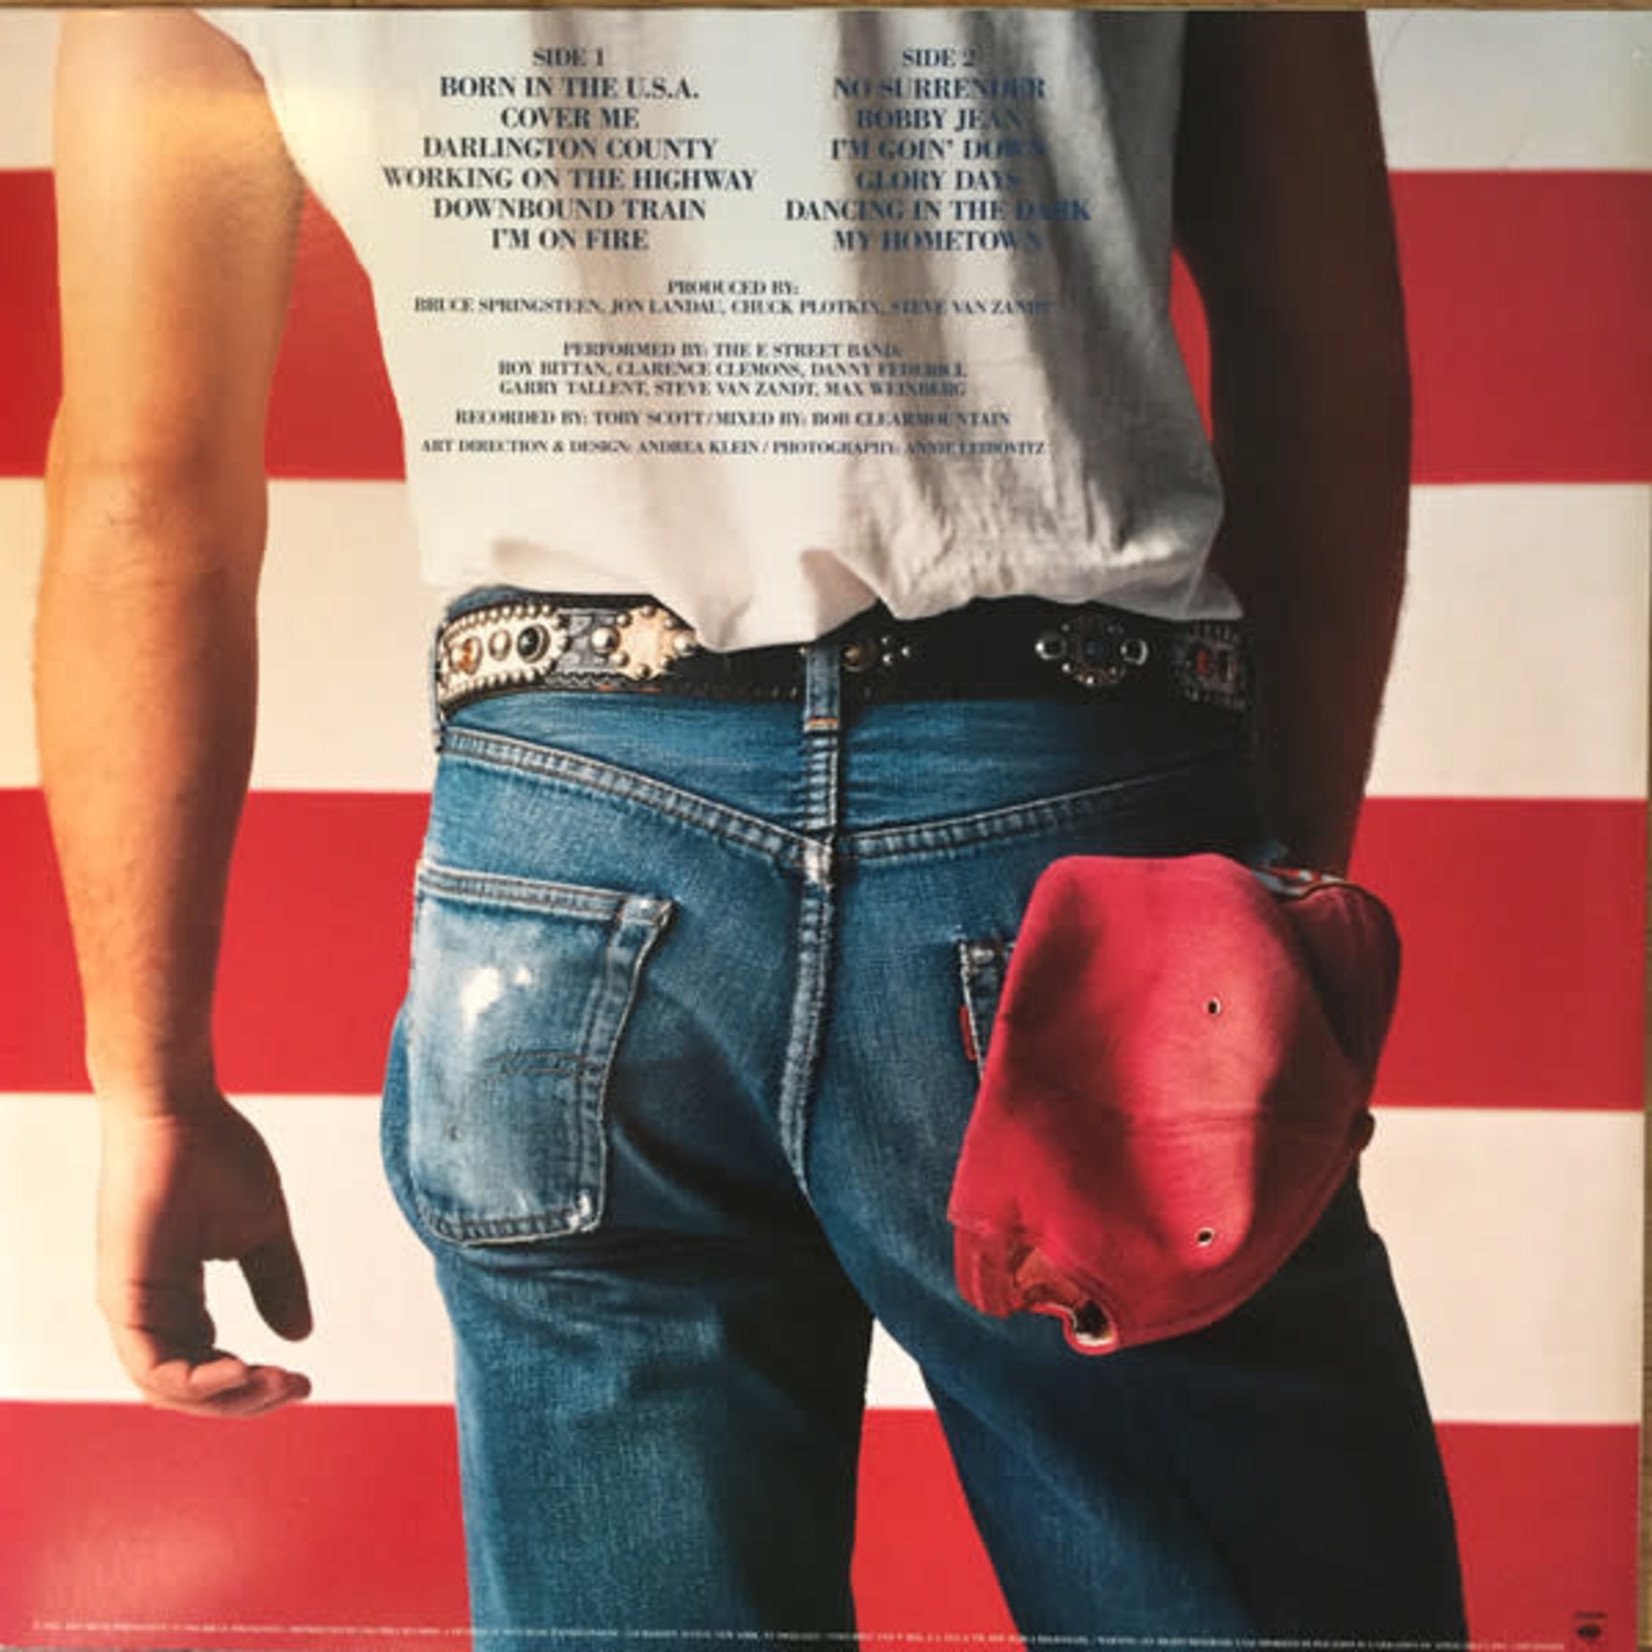 BRUCE SPRINGSTEEN & THE E STREET BAND BORN IN THE U.S.A. (REMASTERED) LP